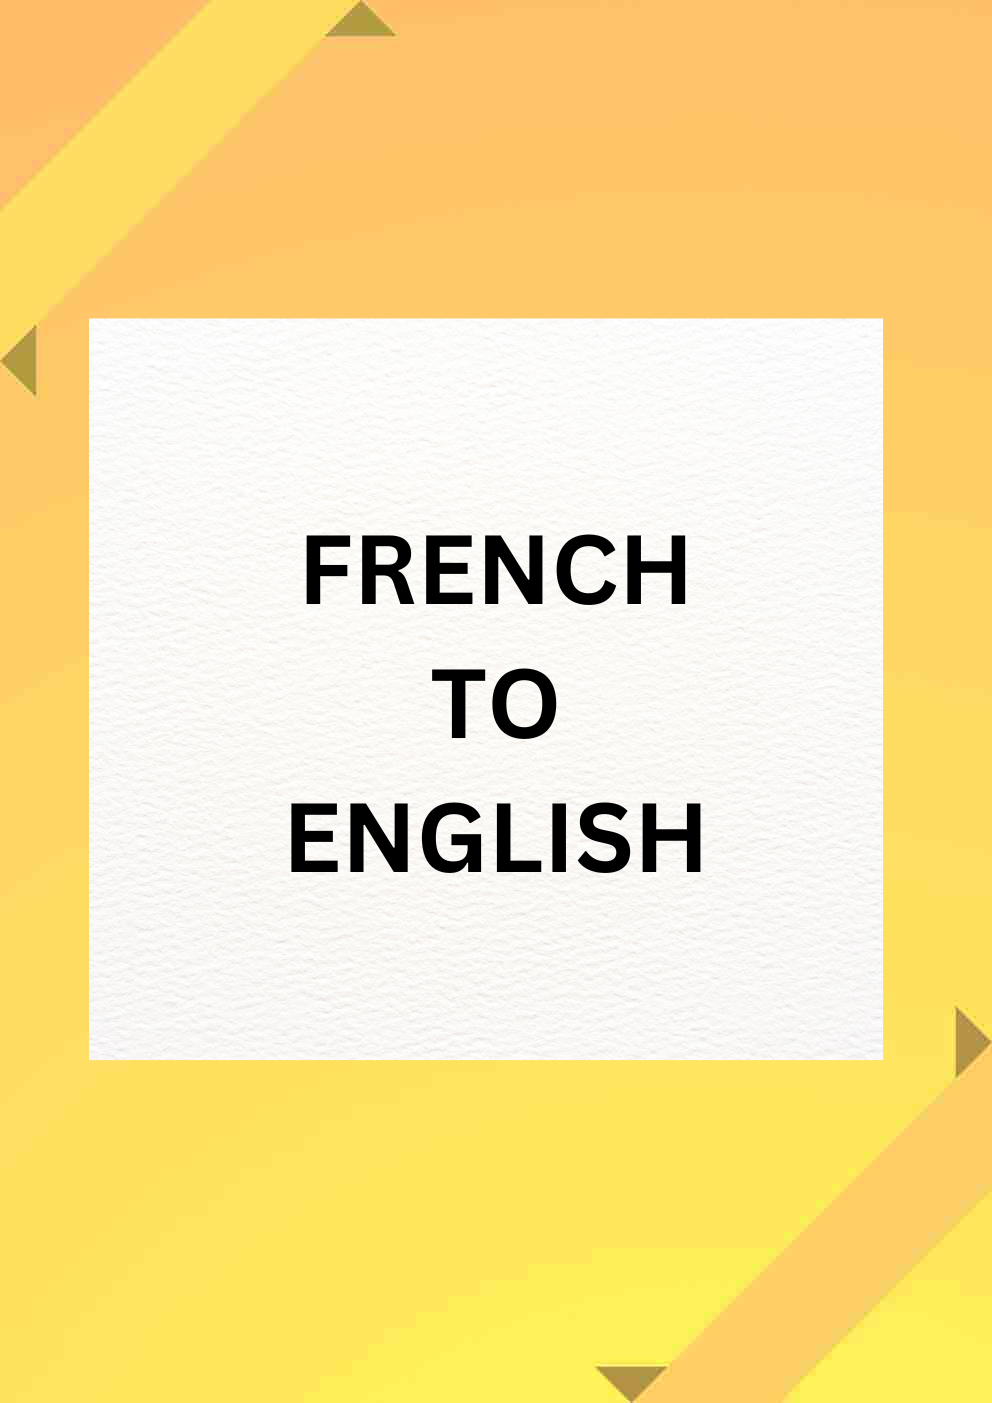 Document translation french  to english [Birth Marriage Degree]